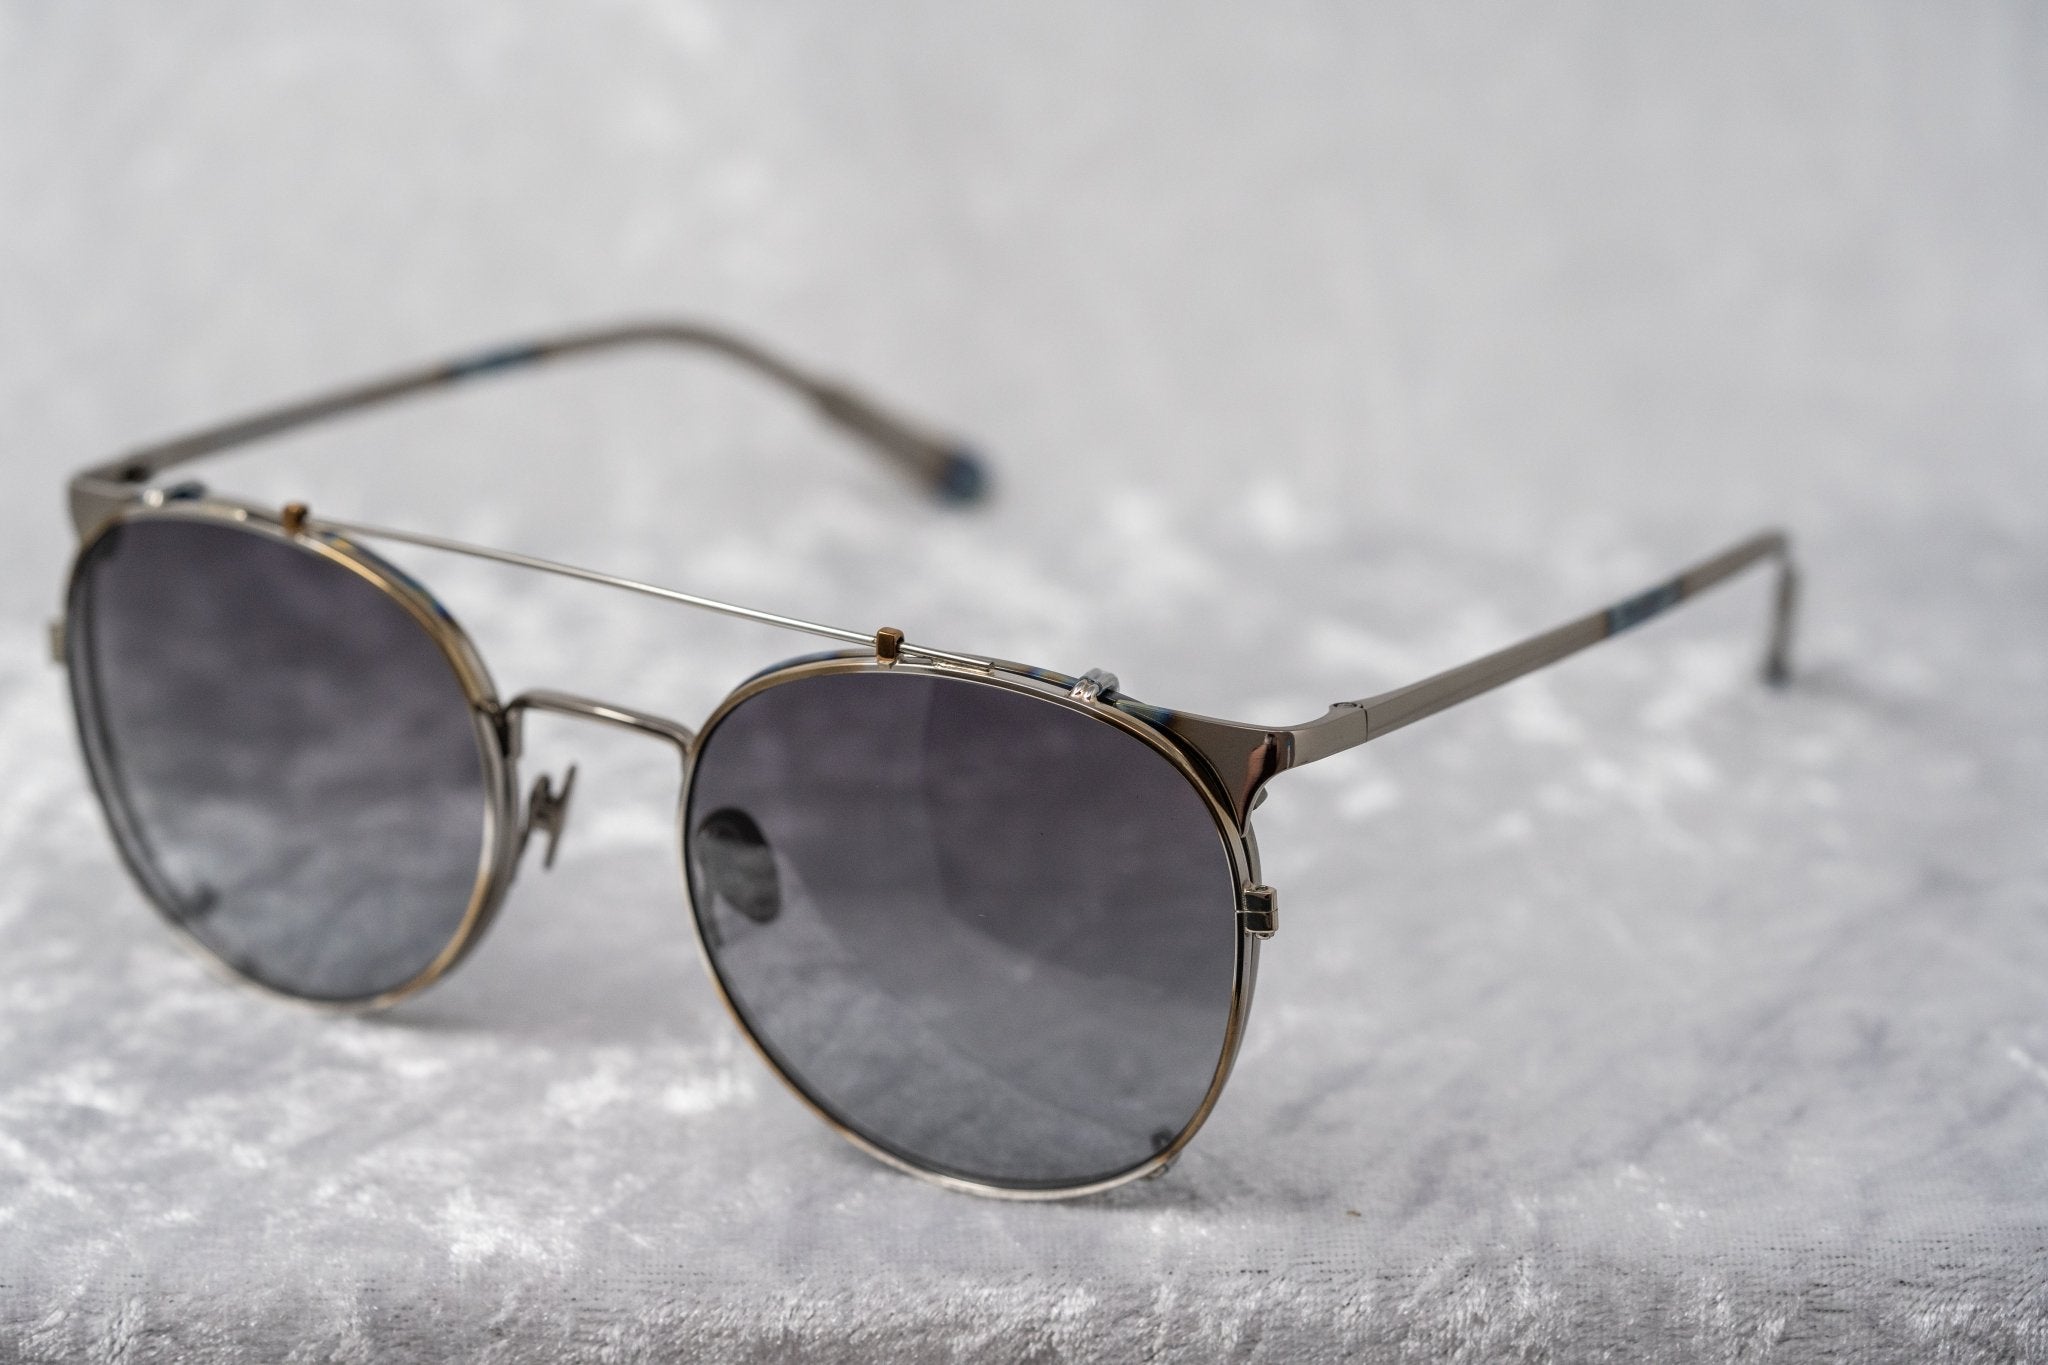 Kris Van Assche Sunglasses Unisex Oval Burnt Silver and Clip-on Grey Graduated Lenses Category 2 - KVA69C2SUN - Watches & Crystals